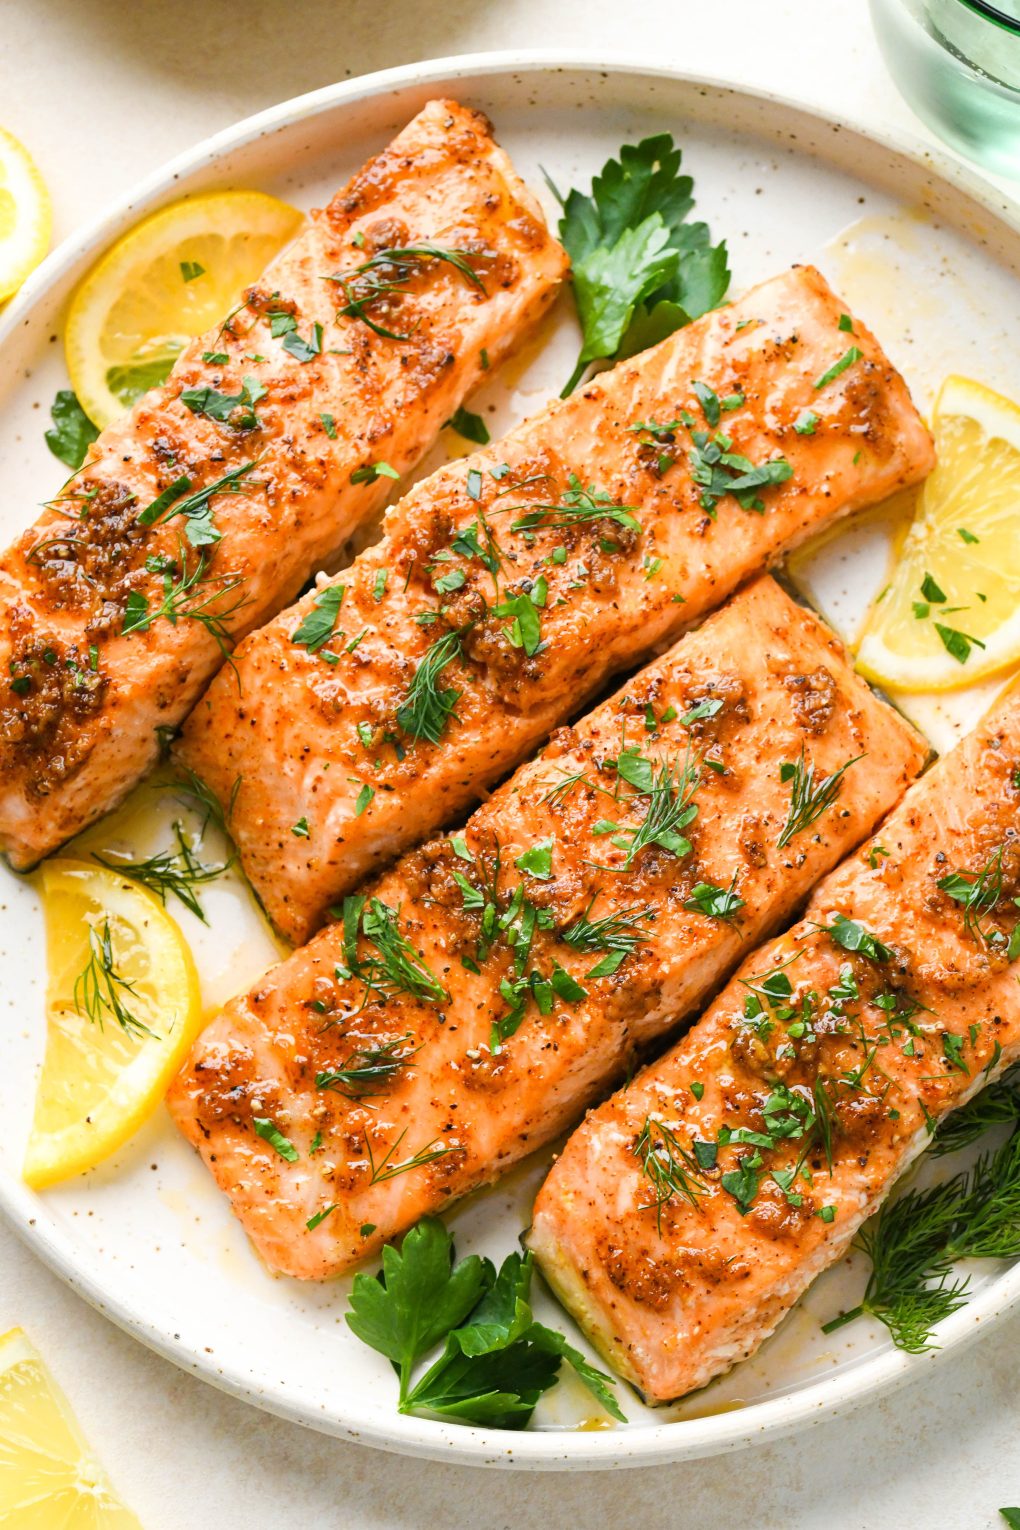 Oven baked salmon fillets on a cream colored ceramic plate, topped with fresh herbs and lemon wedges.